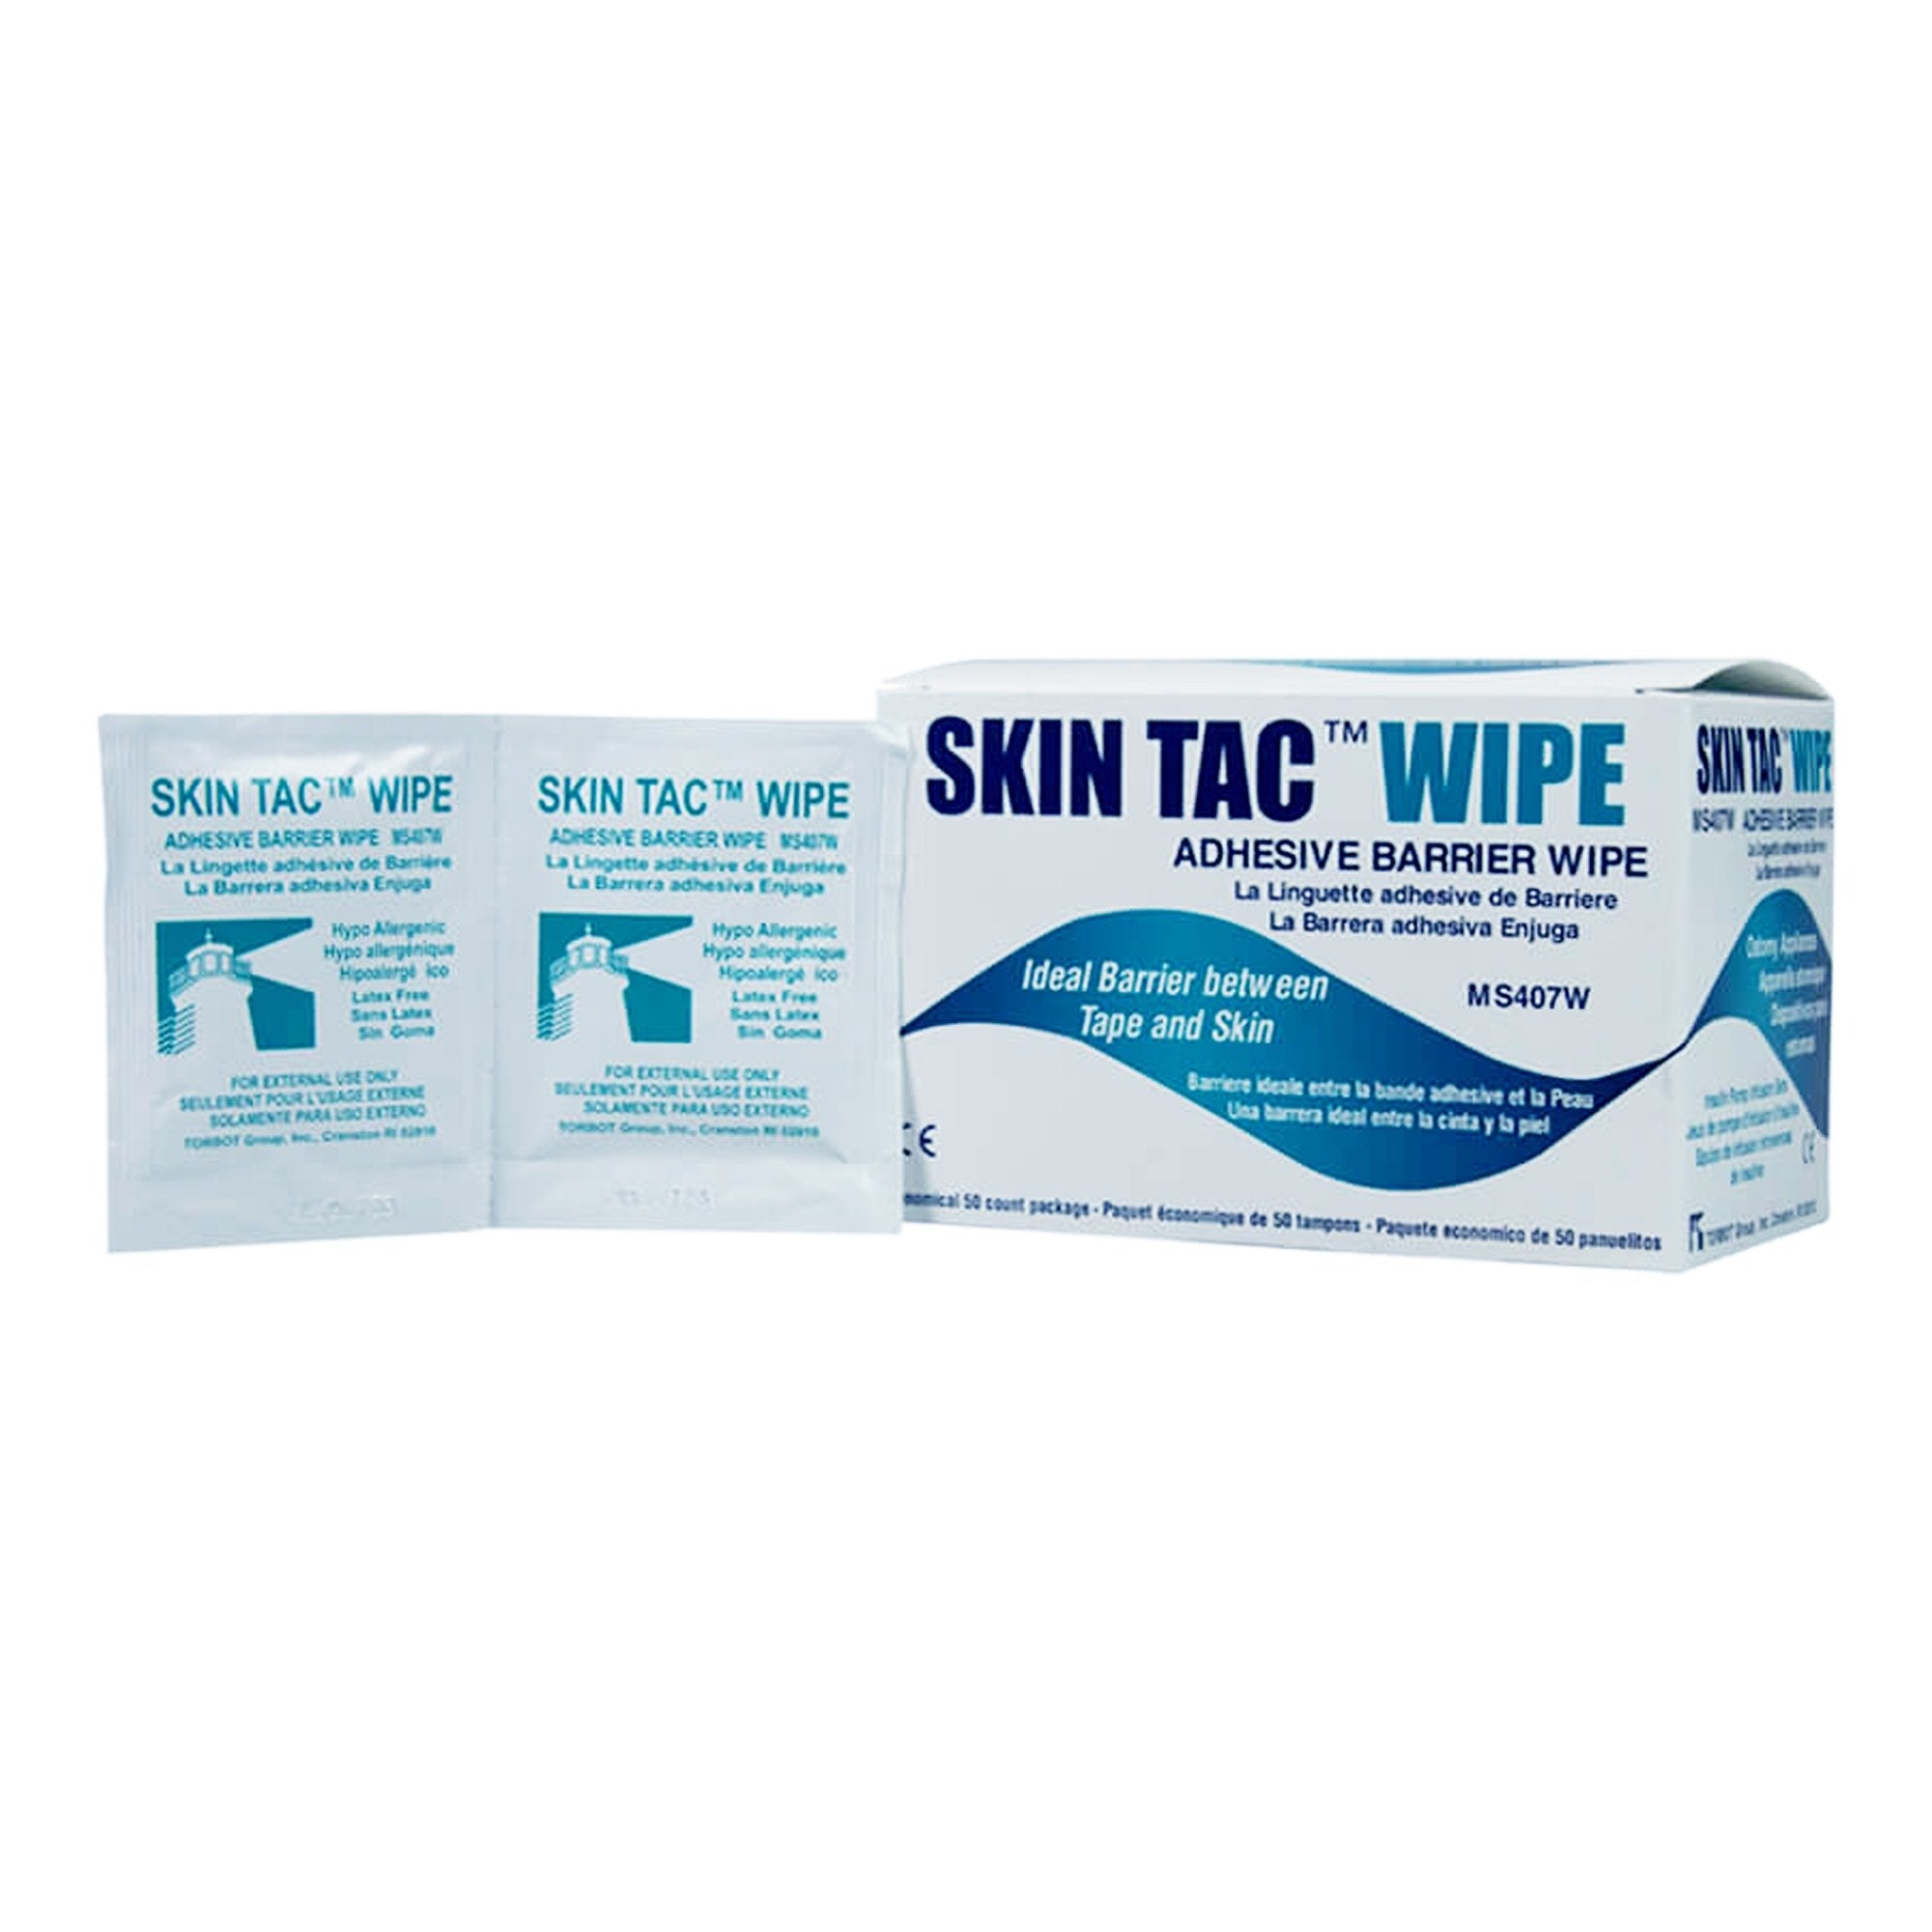 Adhesive Barrier Wipe - 50ct